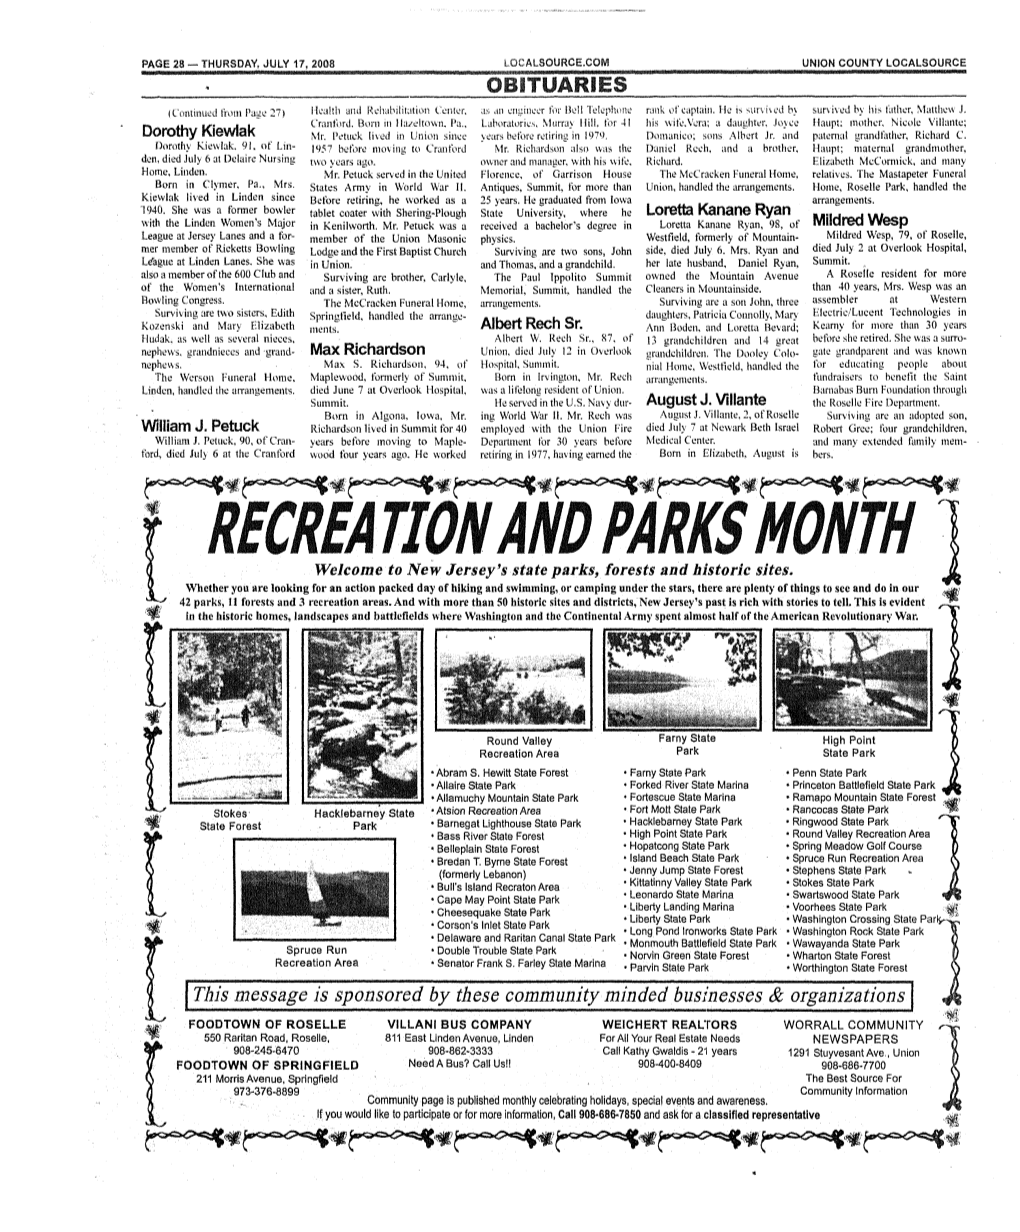 RECREATION and PARKS MONTH Welcome to New Jersey's State Parks, Forests and Historic Sites